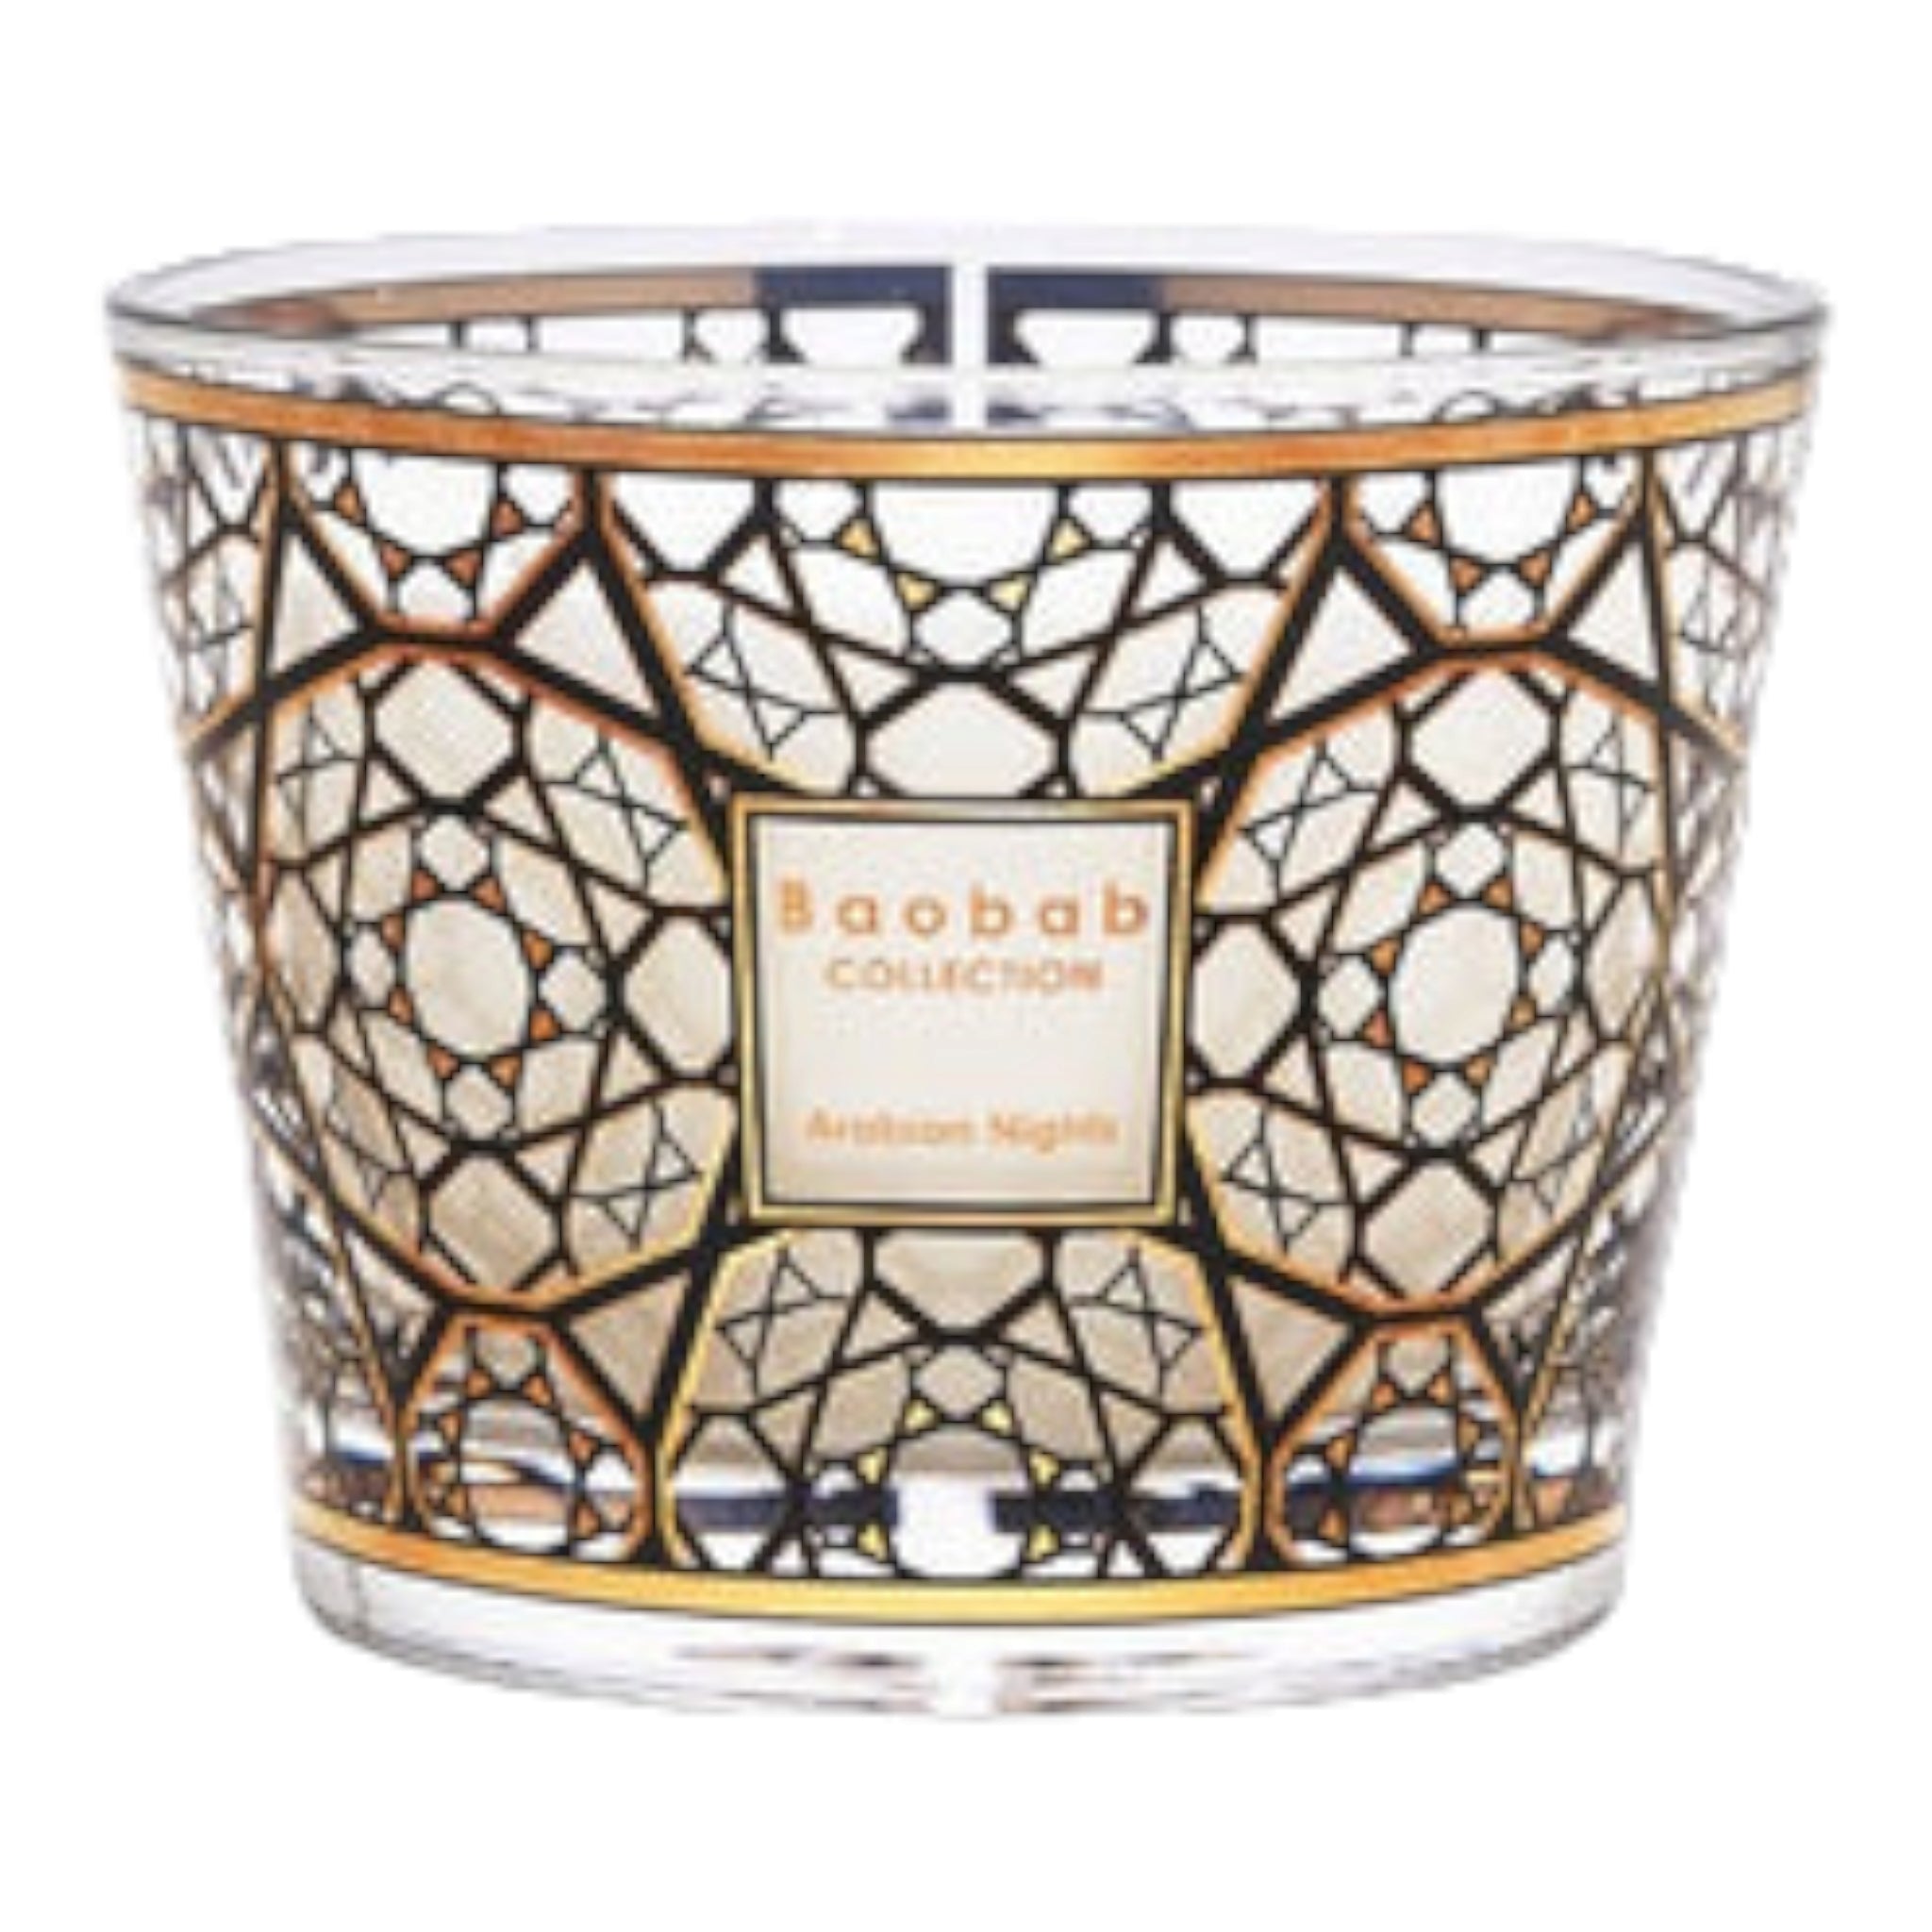 Baobab Collection Arabian nights candle Limited Collection